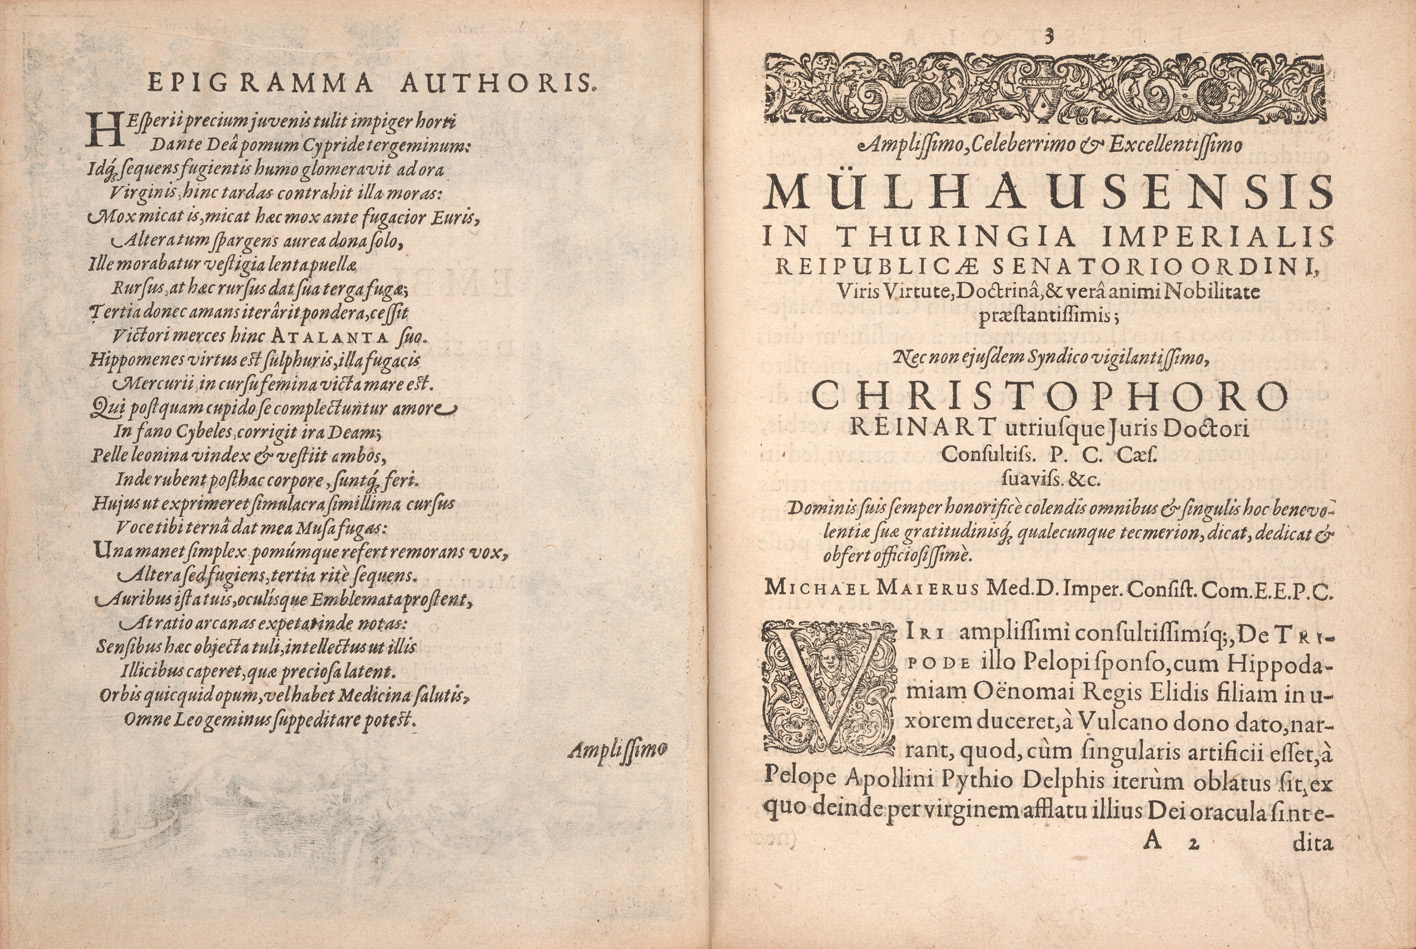 A two-page spread of the author’s epigram and dedication pages from the front matter of Atalanta fugiens.